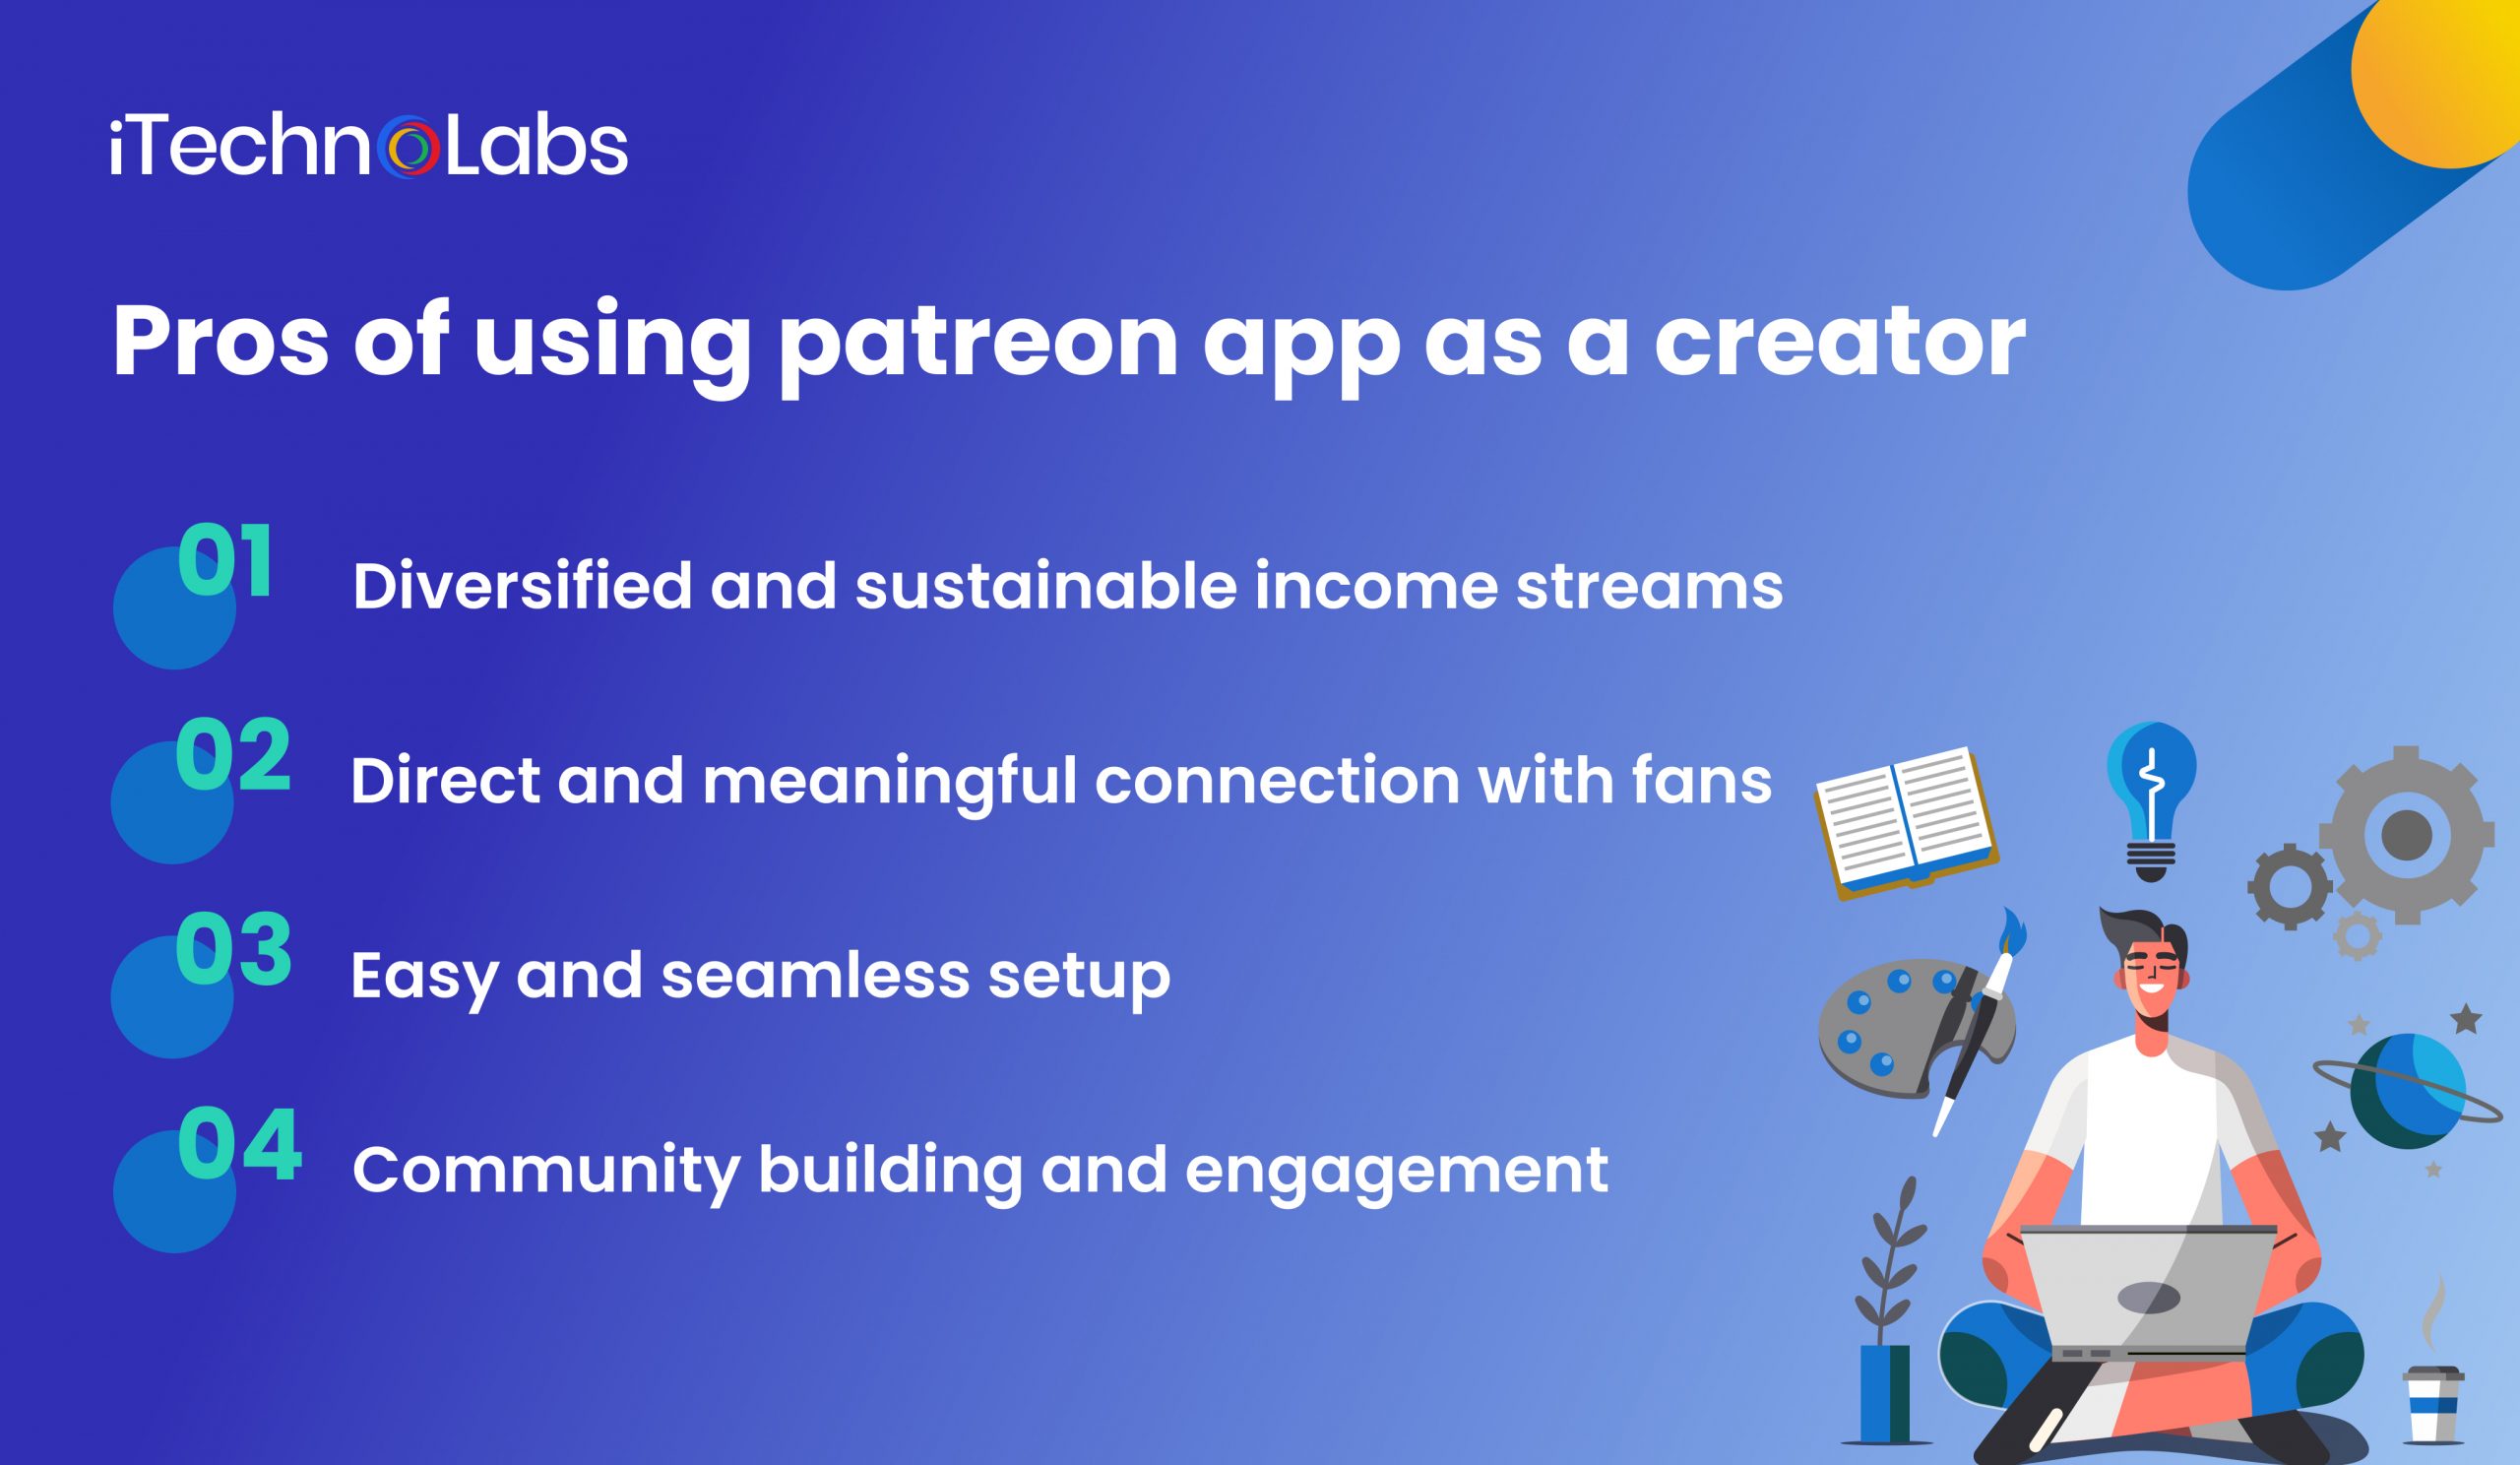 iTechnolabs-Pros of using patreon app as a creator